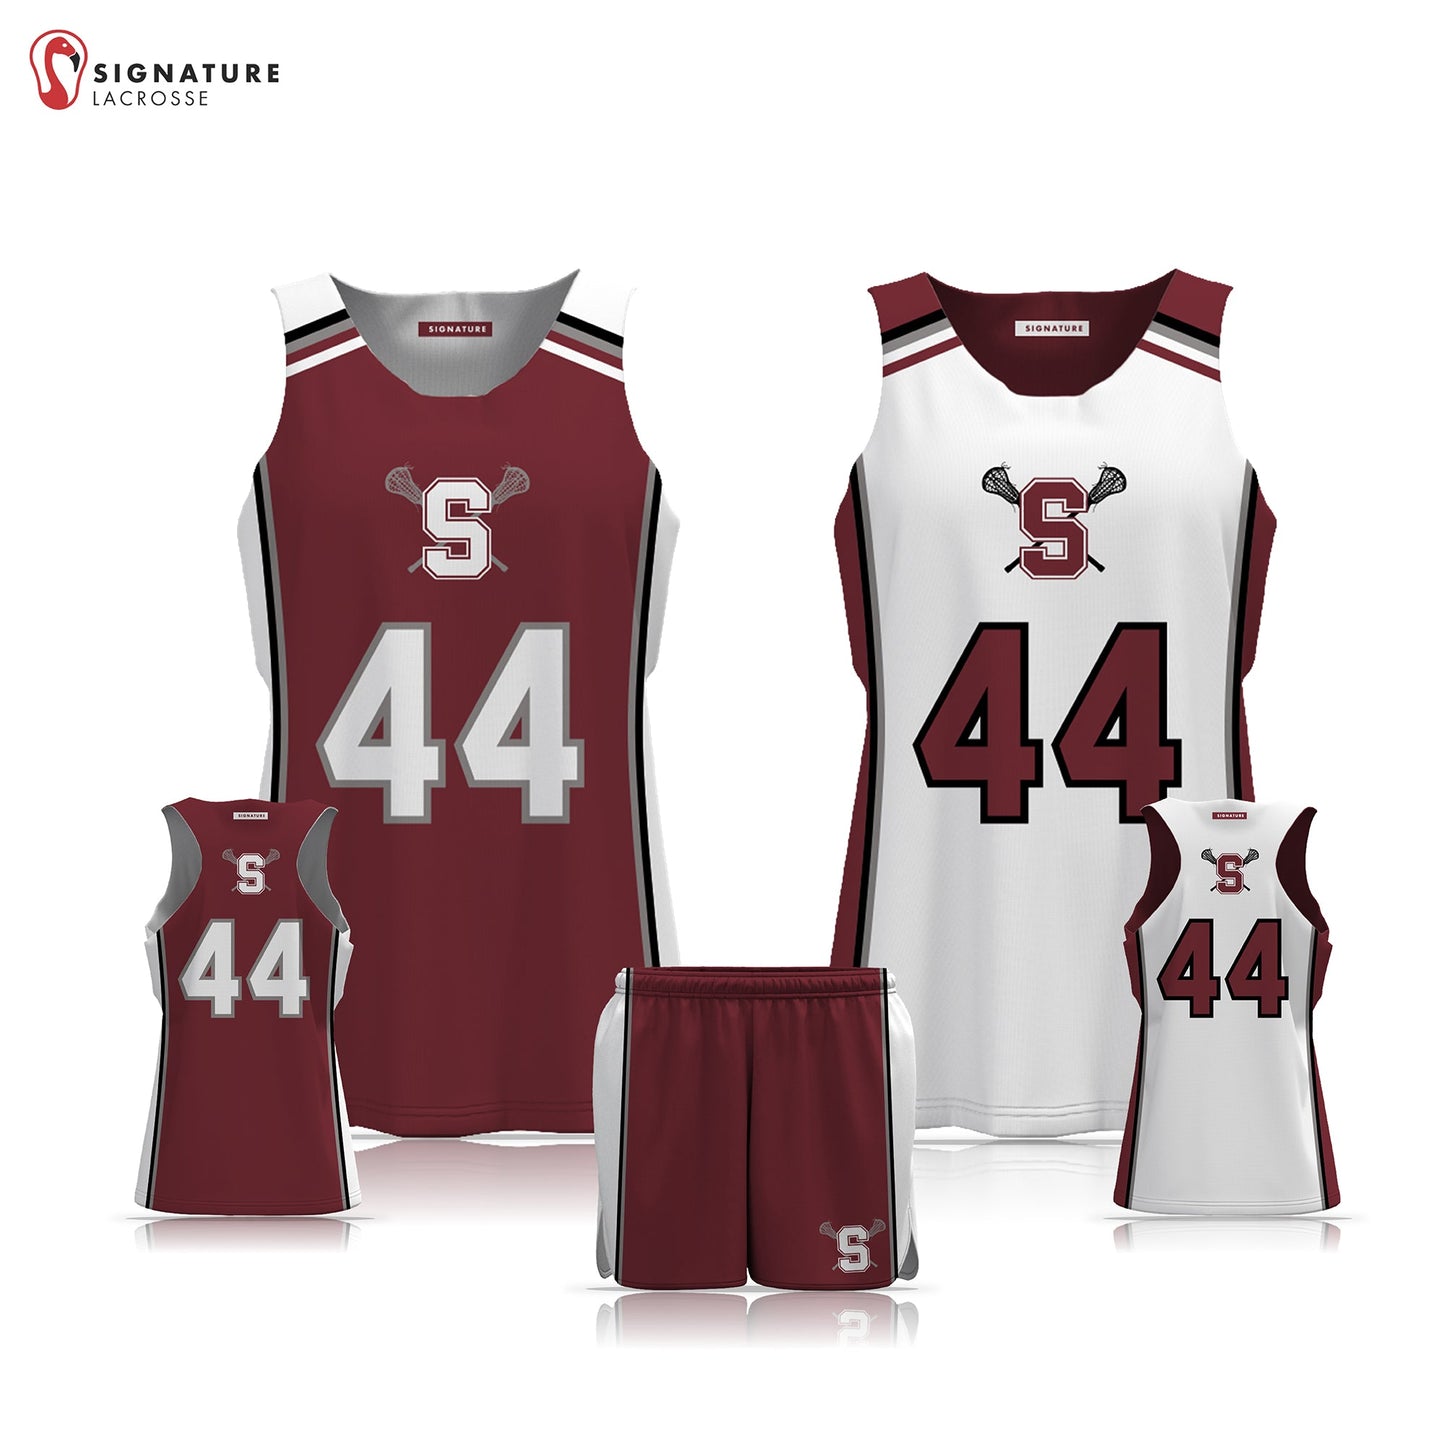 State College Women's 2 Piece Player Game Package: K-2 Signature Lacrosse